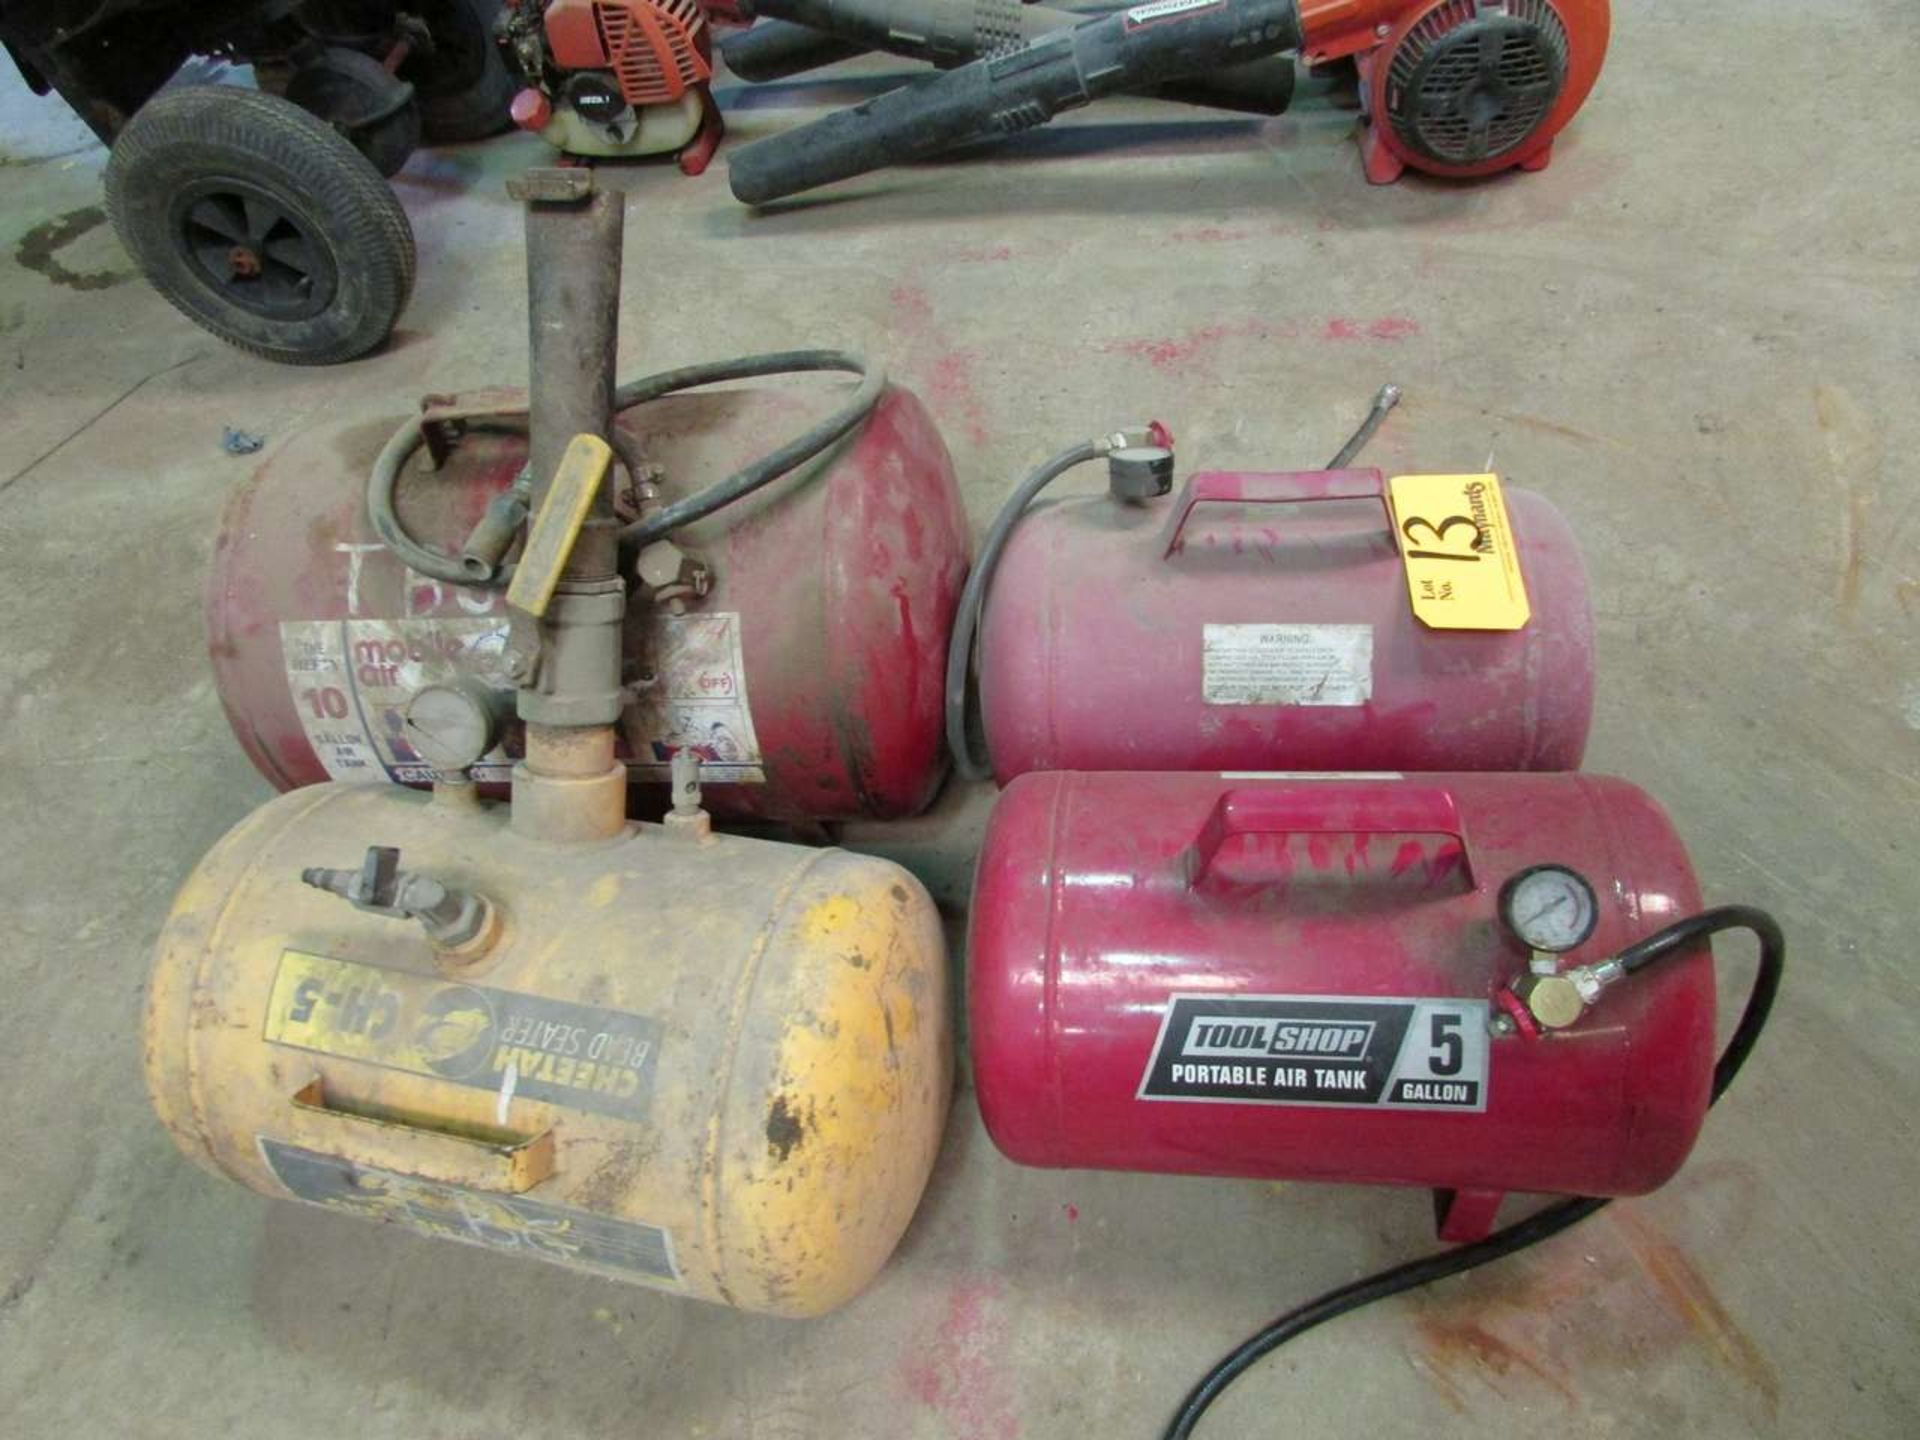 Portable Compressed Air Tanks - Image 2 of 2